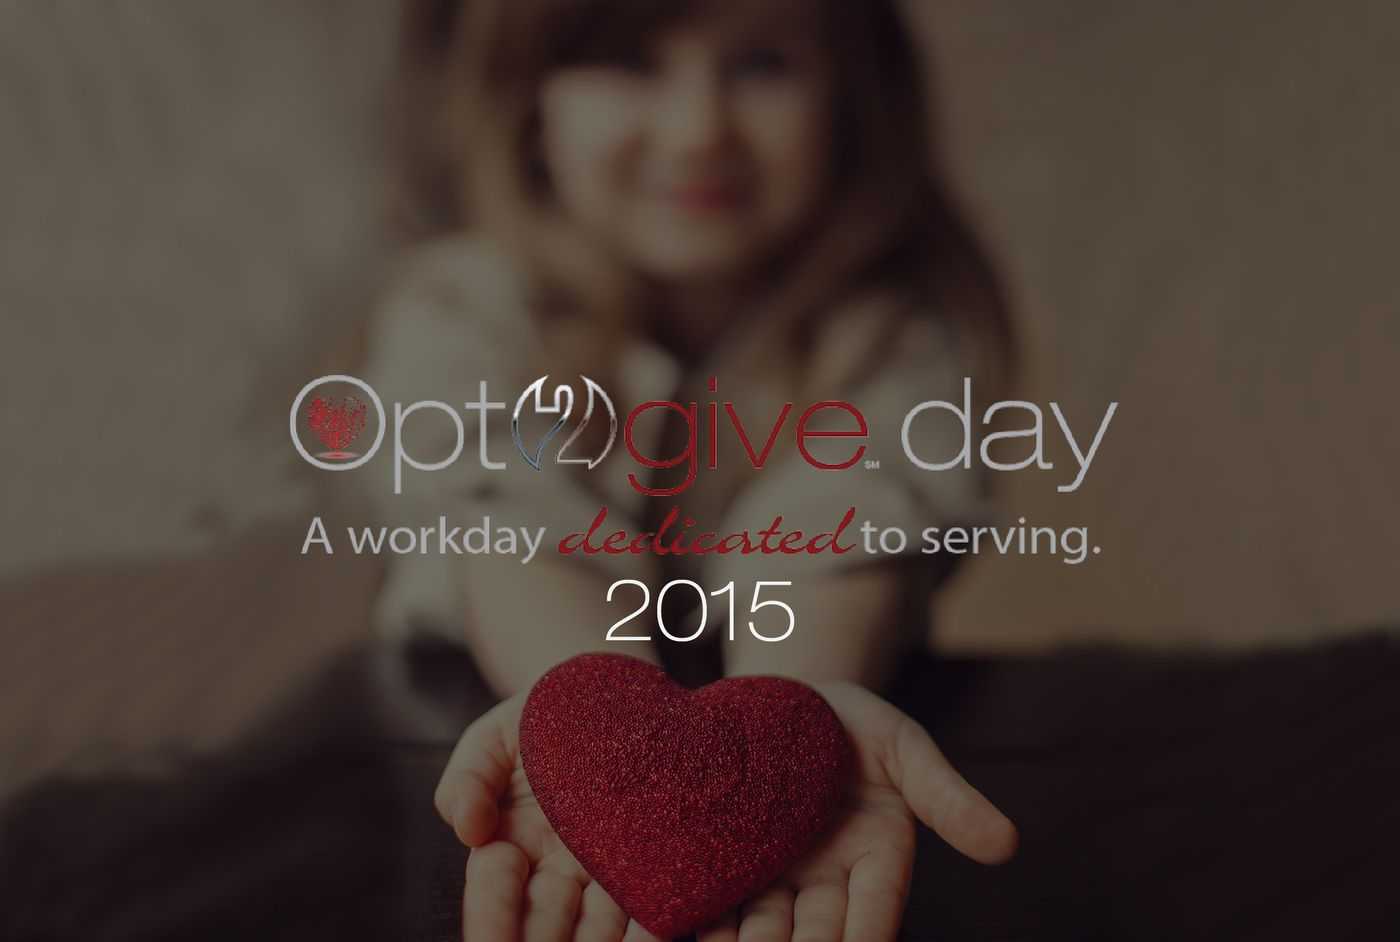 The Dallas Team Mentors Kids for Opt2give day 2015